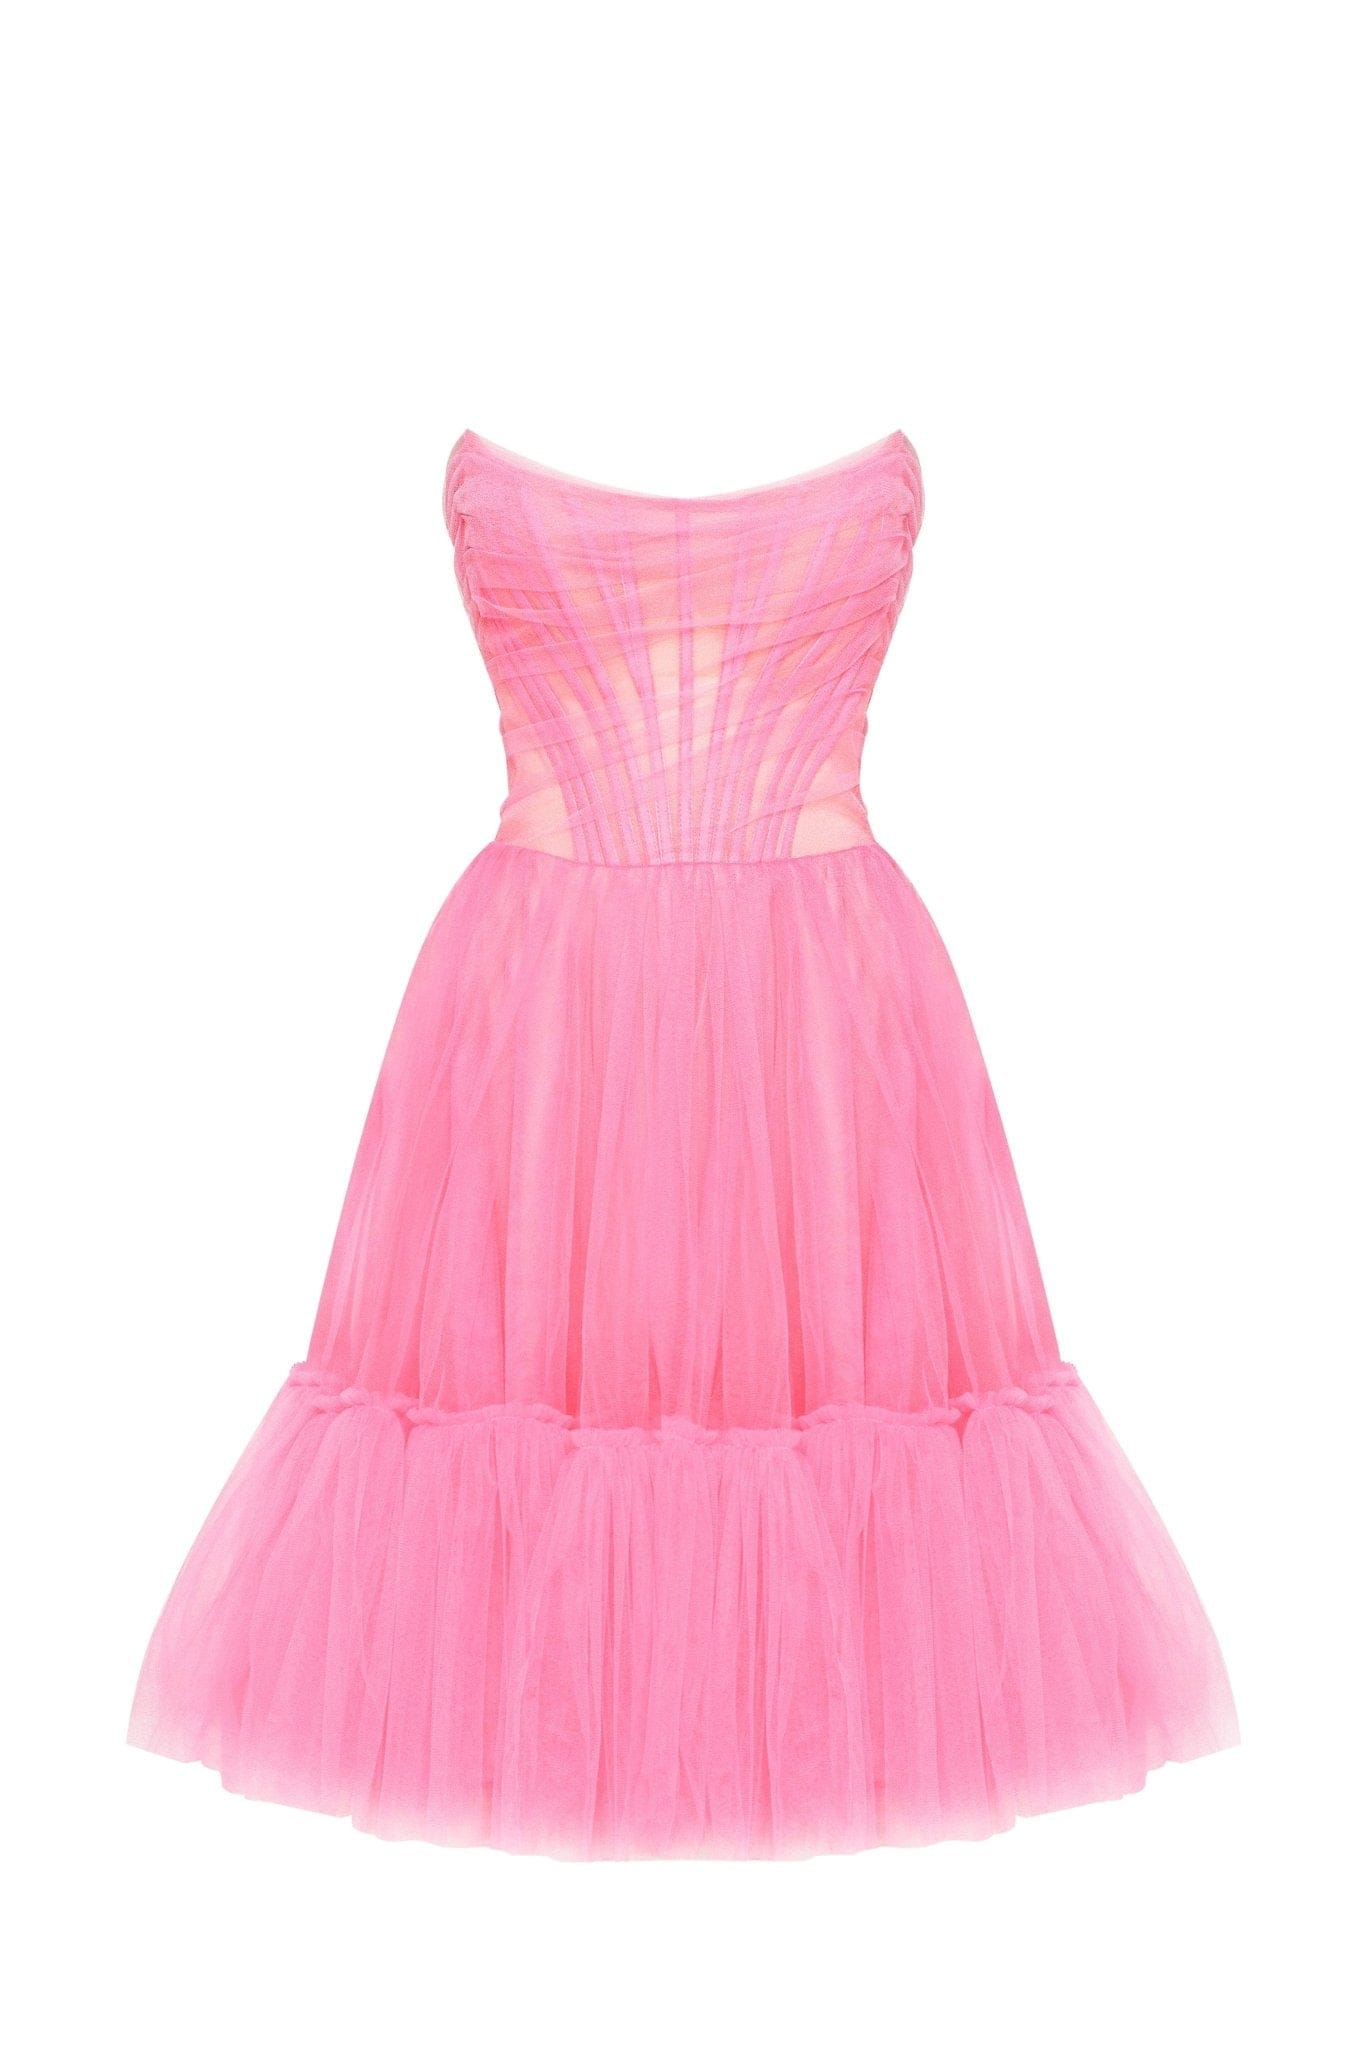 All-In-Pink bustier tulle dress - Milla